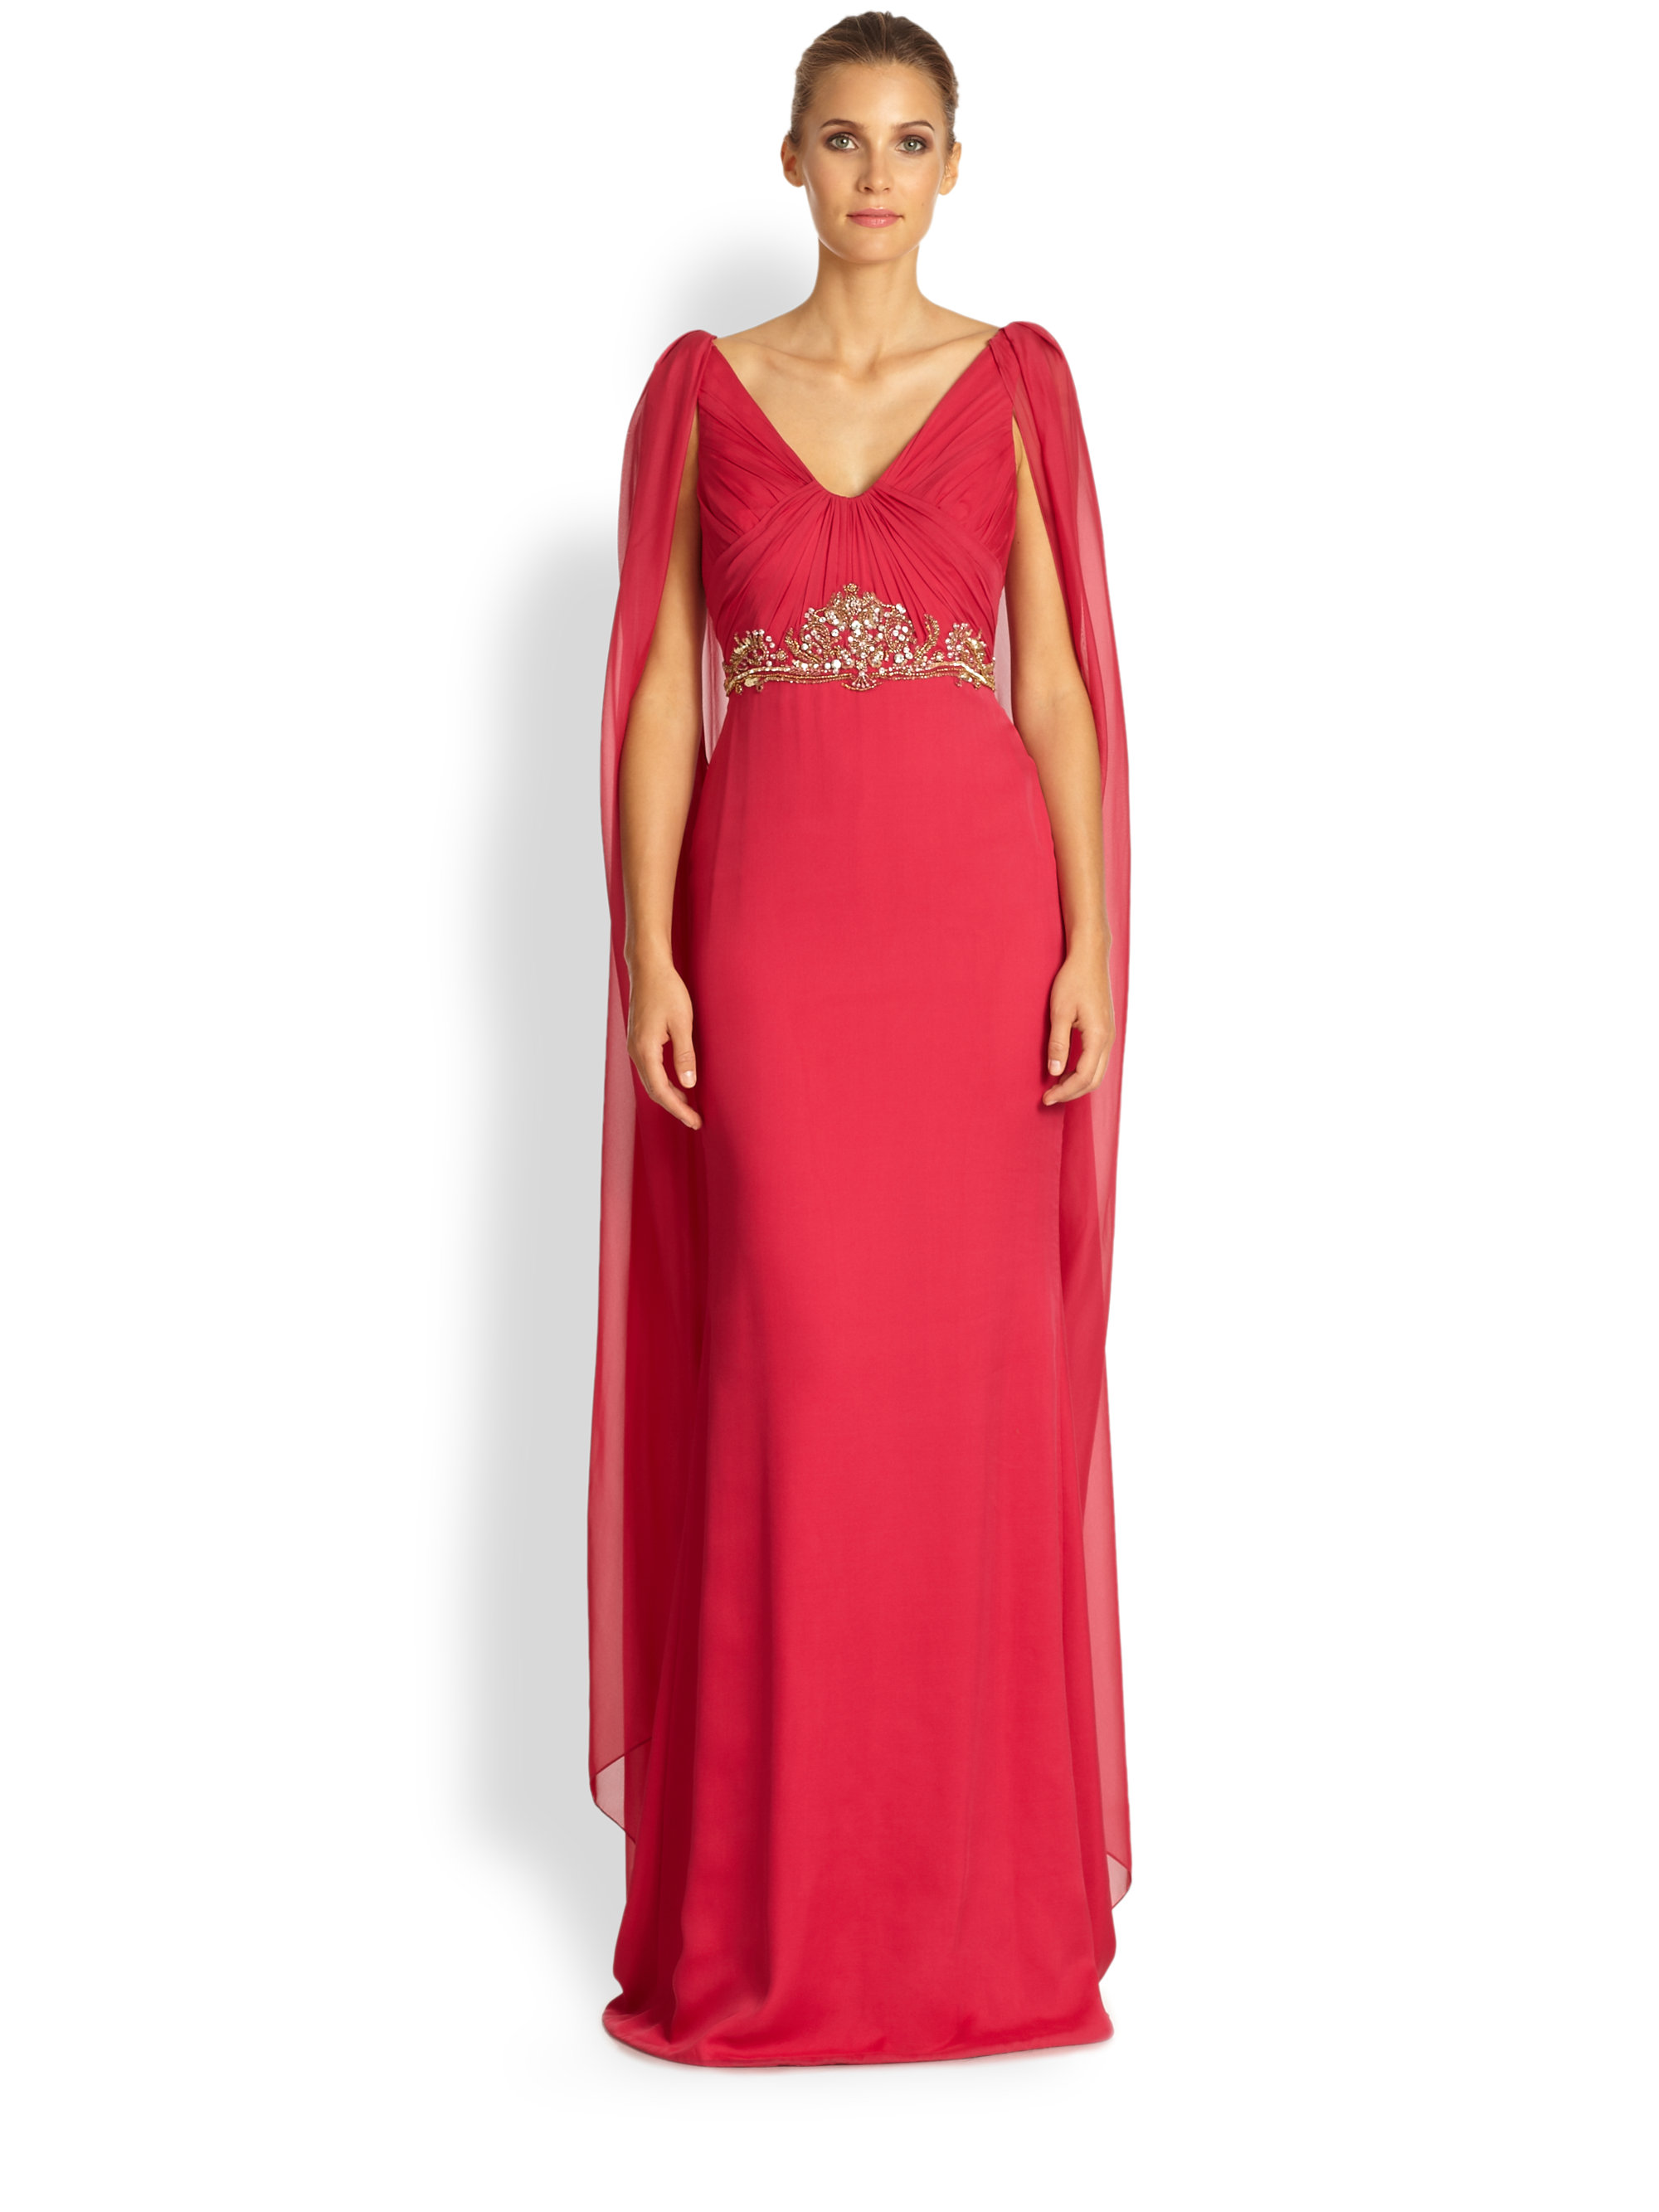 Lyst - Notte By Marchesa Silk Chiffon Caftan Gown in Red